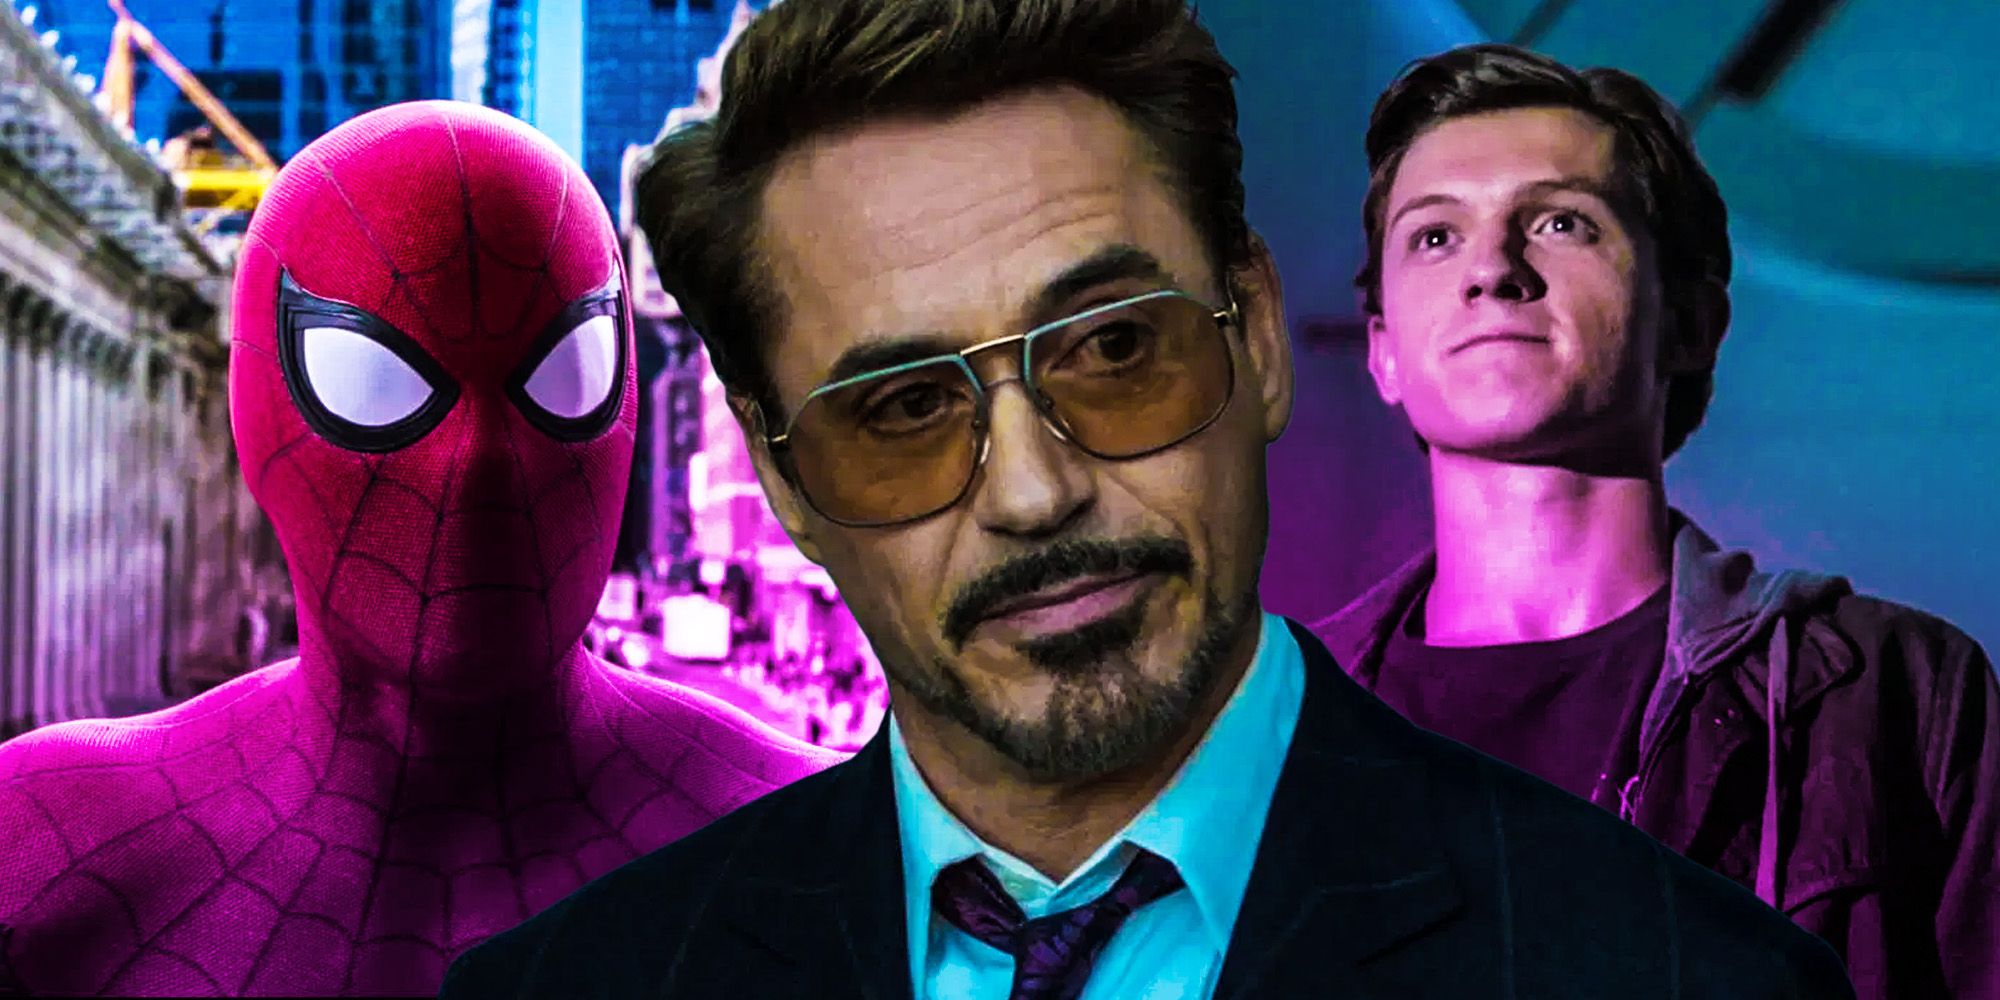 Tony stark homecoming plan would have caused spiderman identity twist Spiderman far from home